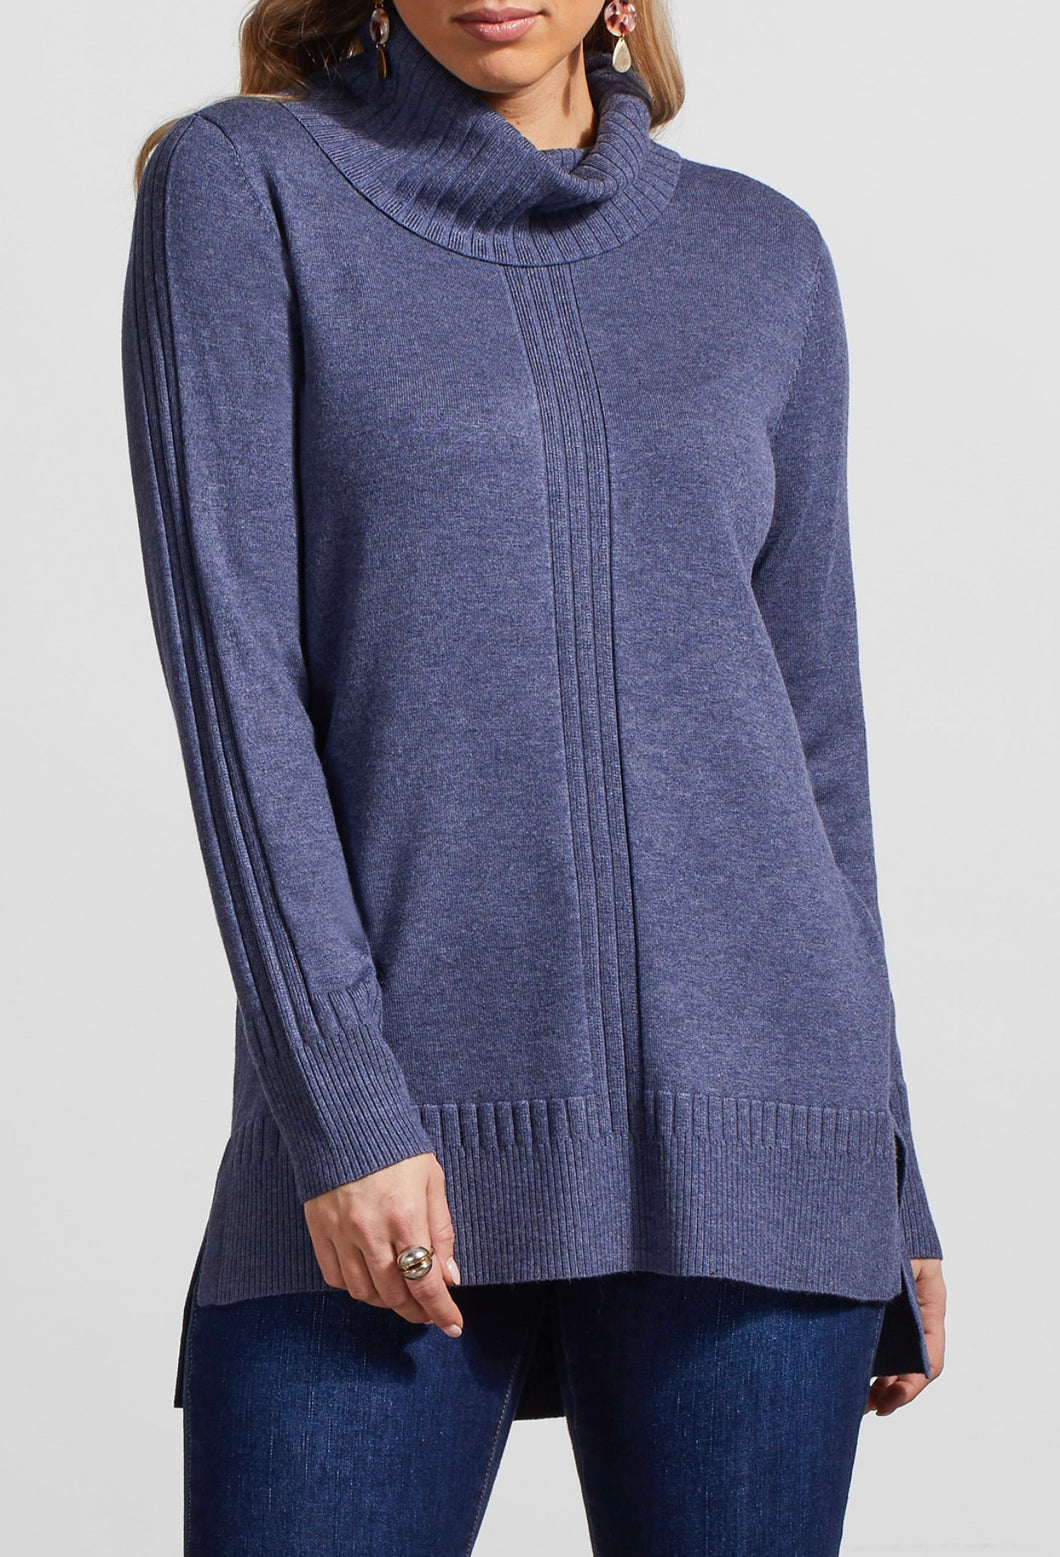 Tribal: Long Sleeve Cowl Neck Sweater in H. Sapphire